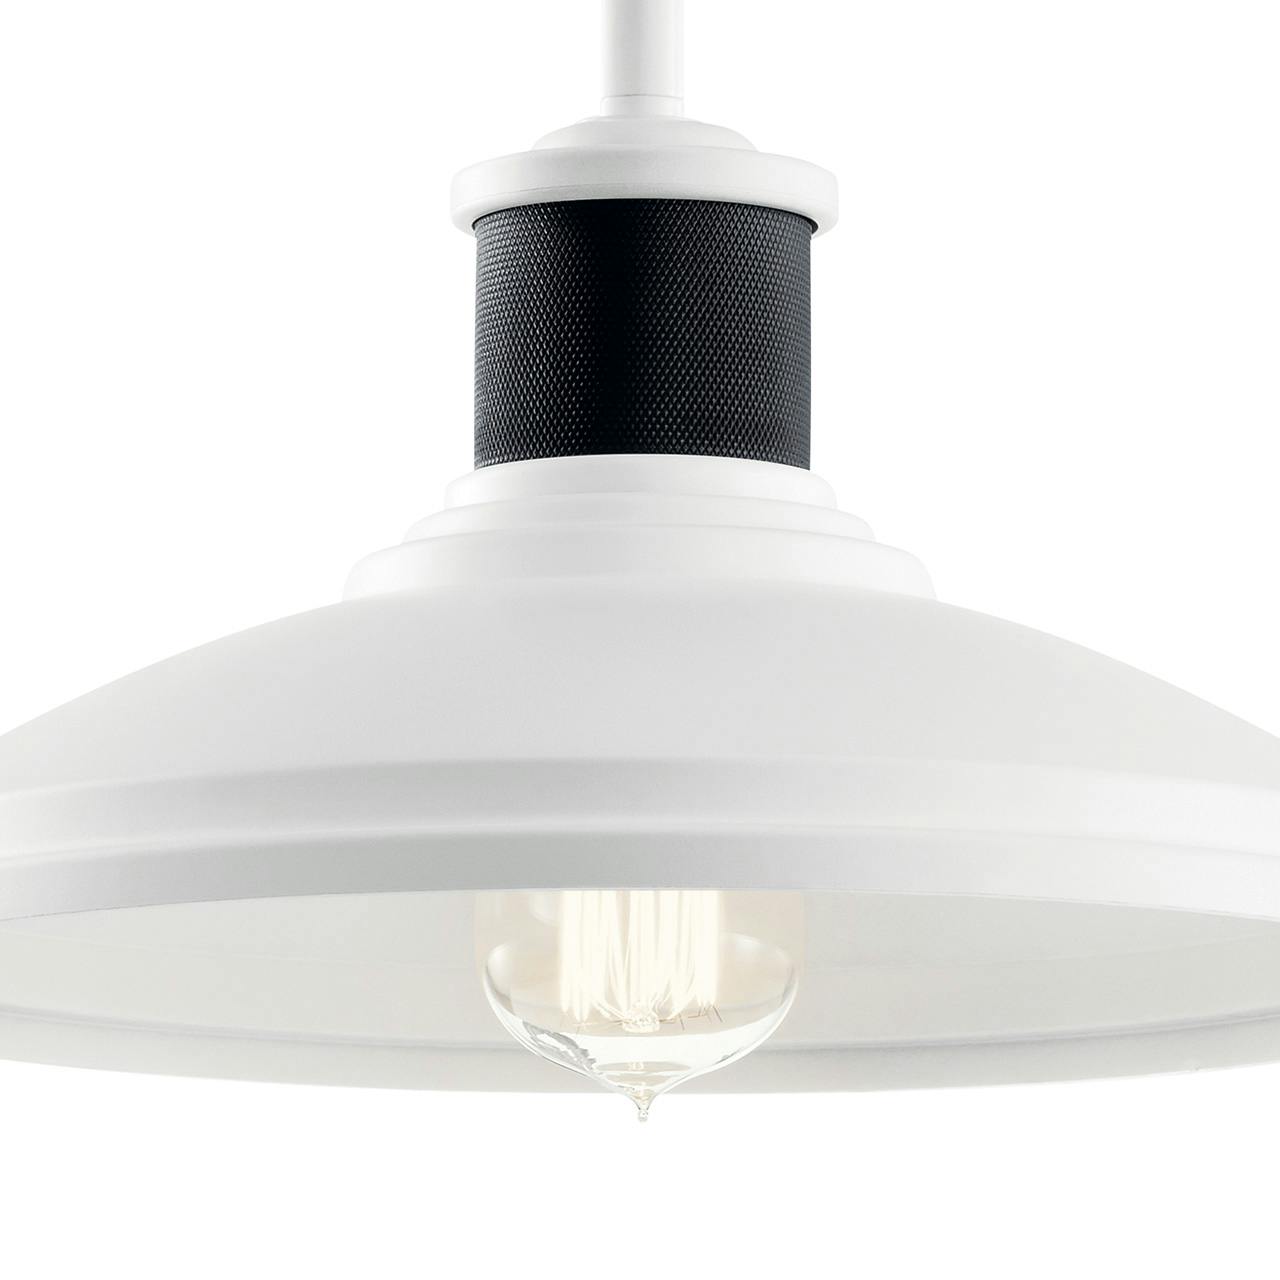 Close up view of the Allenbury™ Convertible Pendant White on a white background